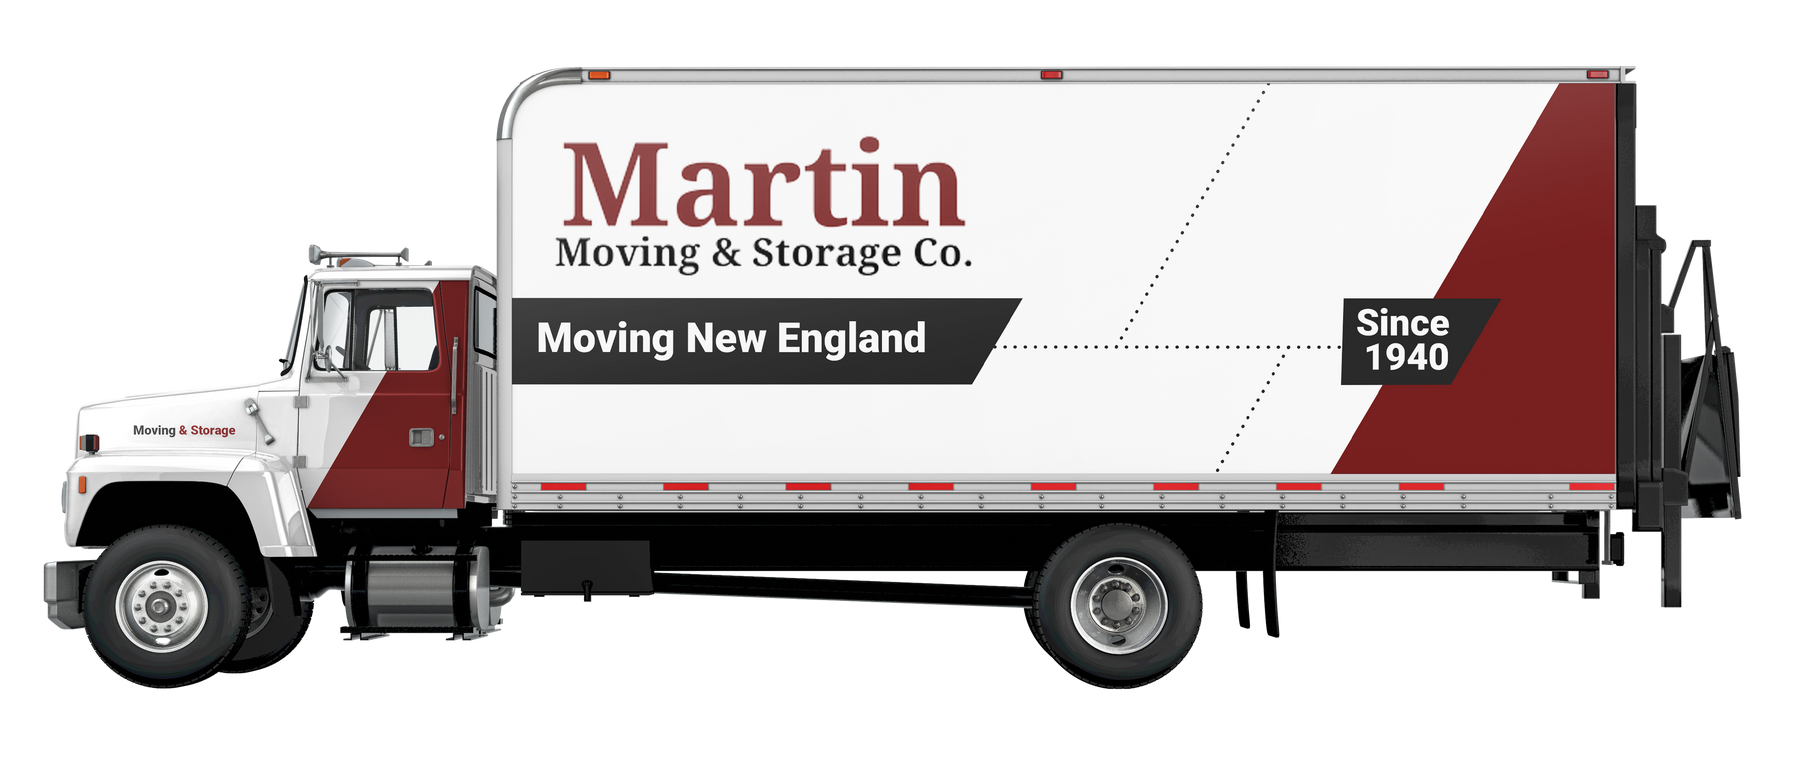 Martin Moving & Storage Moving Truck